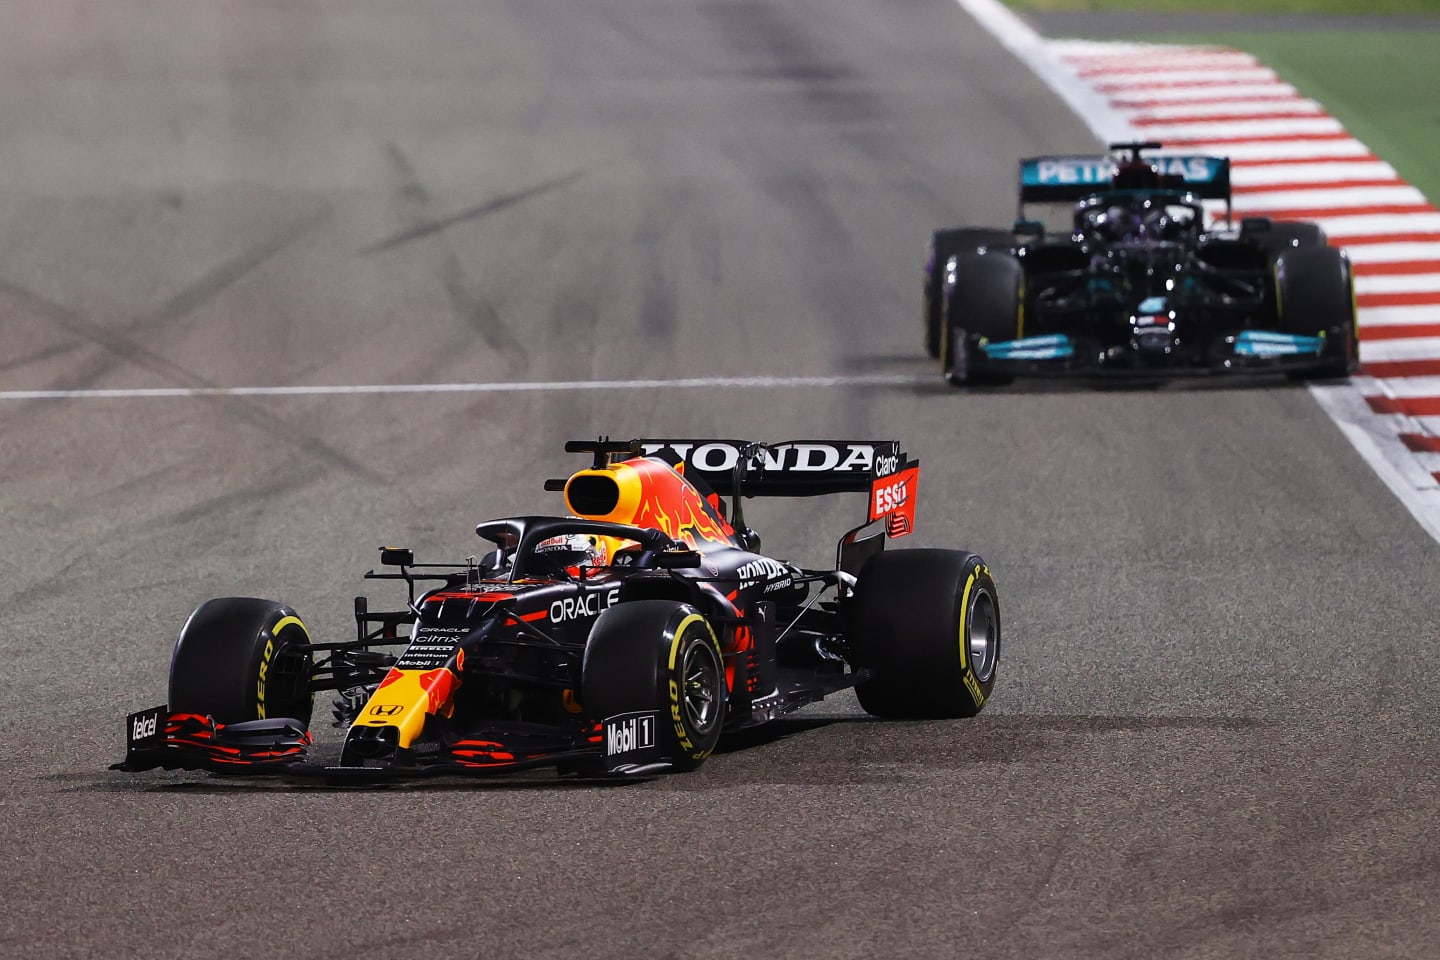 BAHRAIN, BAHRAIN - MARCH 28: Max Verstappen of the Netherlands driving the (33) Red Bull Racing RB16B Honda leads Lewis Hamilton of Great Britain driving the (44) Mercedes AMG Petronas F1 Team Mercedes W12 during the F1 Grand Prix of Bahrain at Bahrain International Circuit on March 28, 2021 in Bahrain, Bahrain. (Photo by Bryn Lennon/Getty Images)